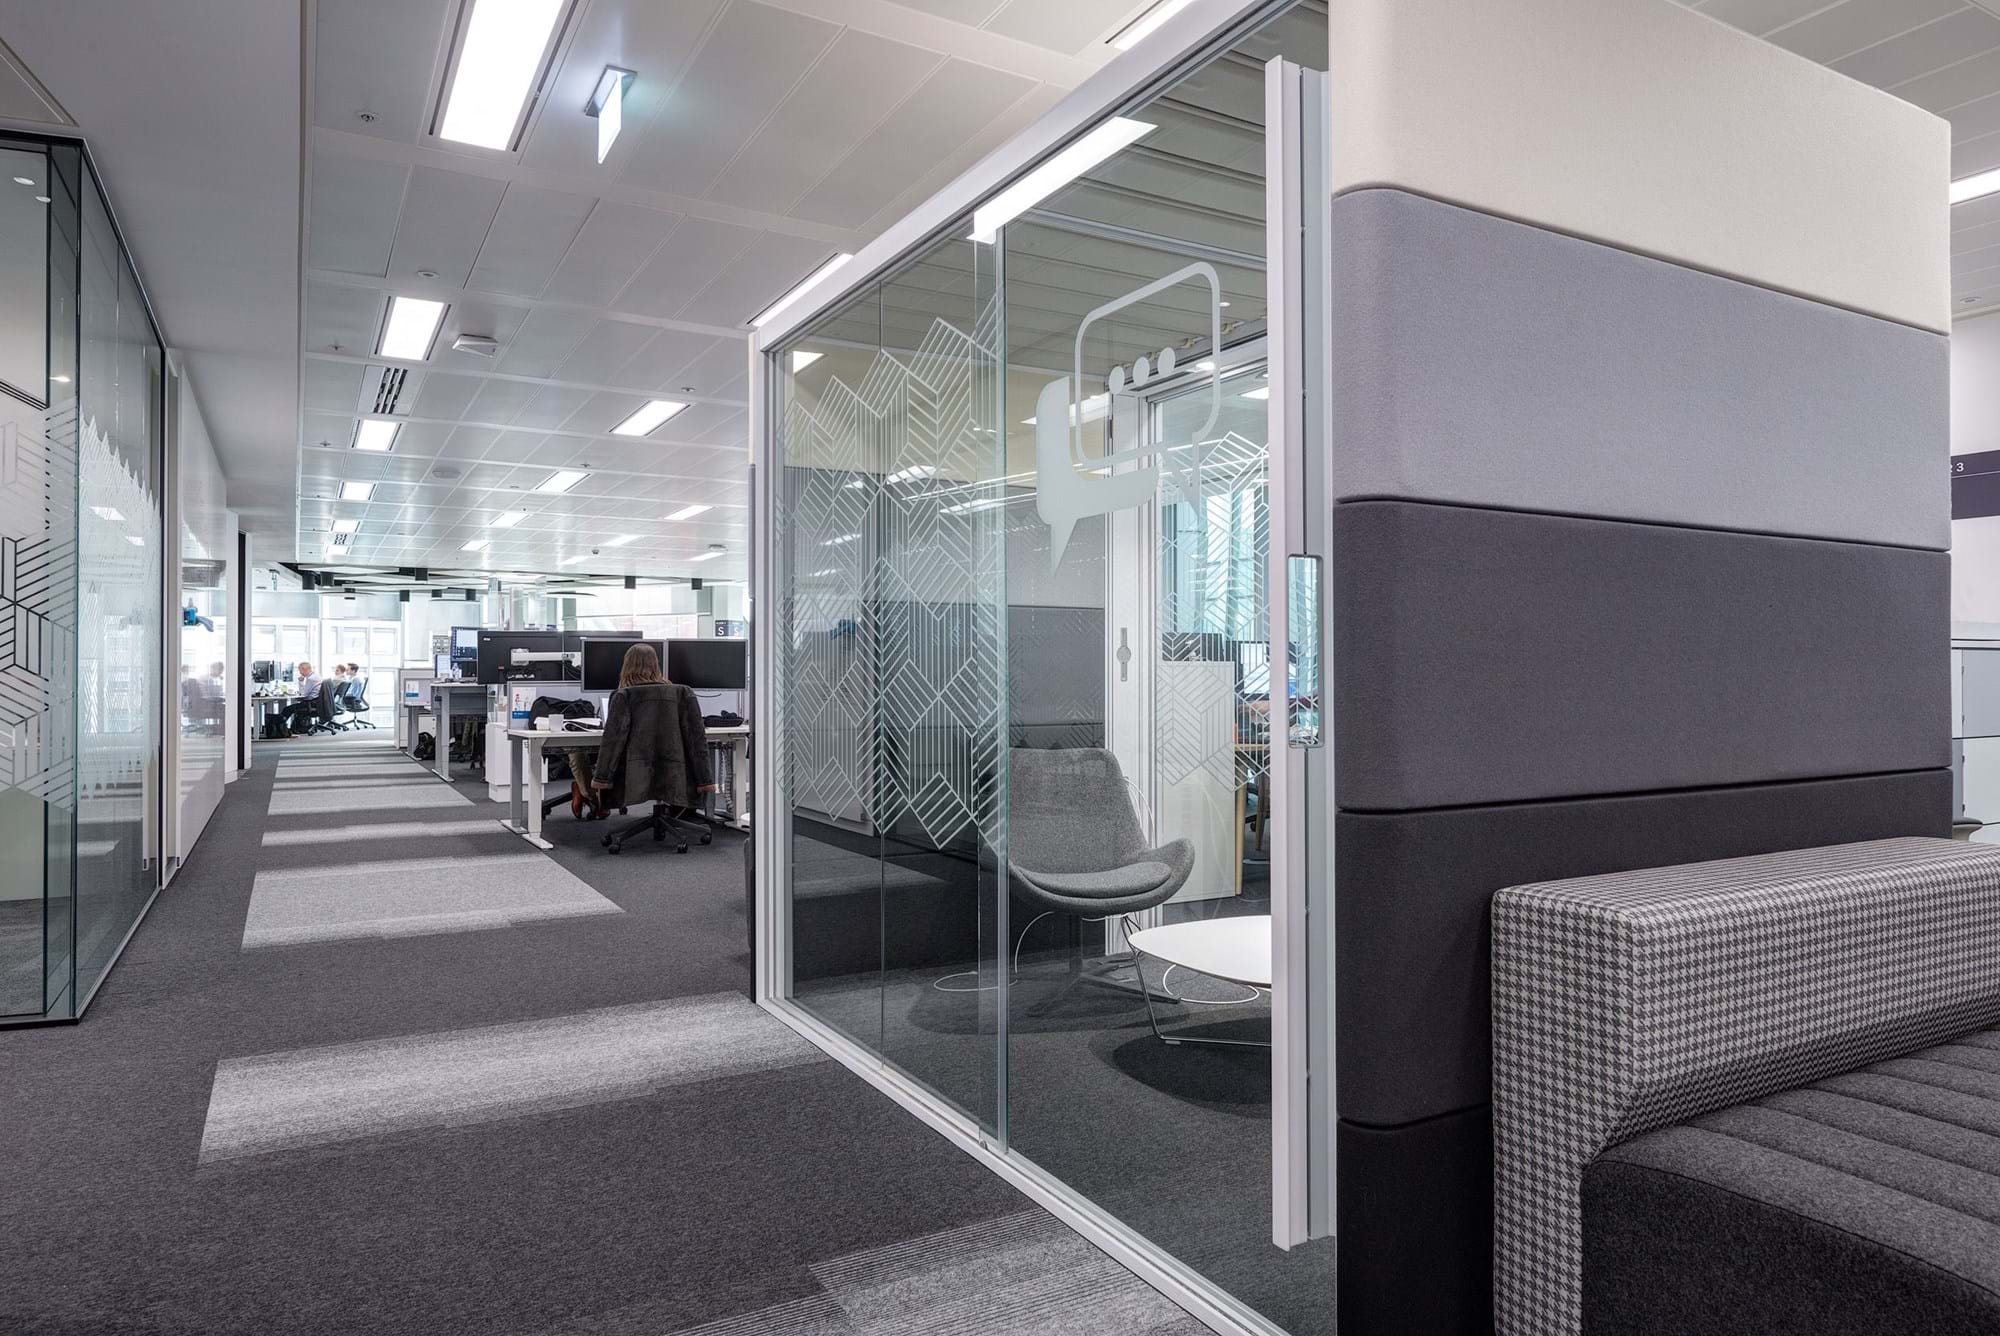 Modus Workspace office design, fit out and refurbishment - Atkins - Victoria, London - Atkins 05 highres sRGB.jpg